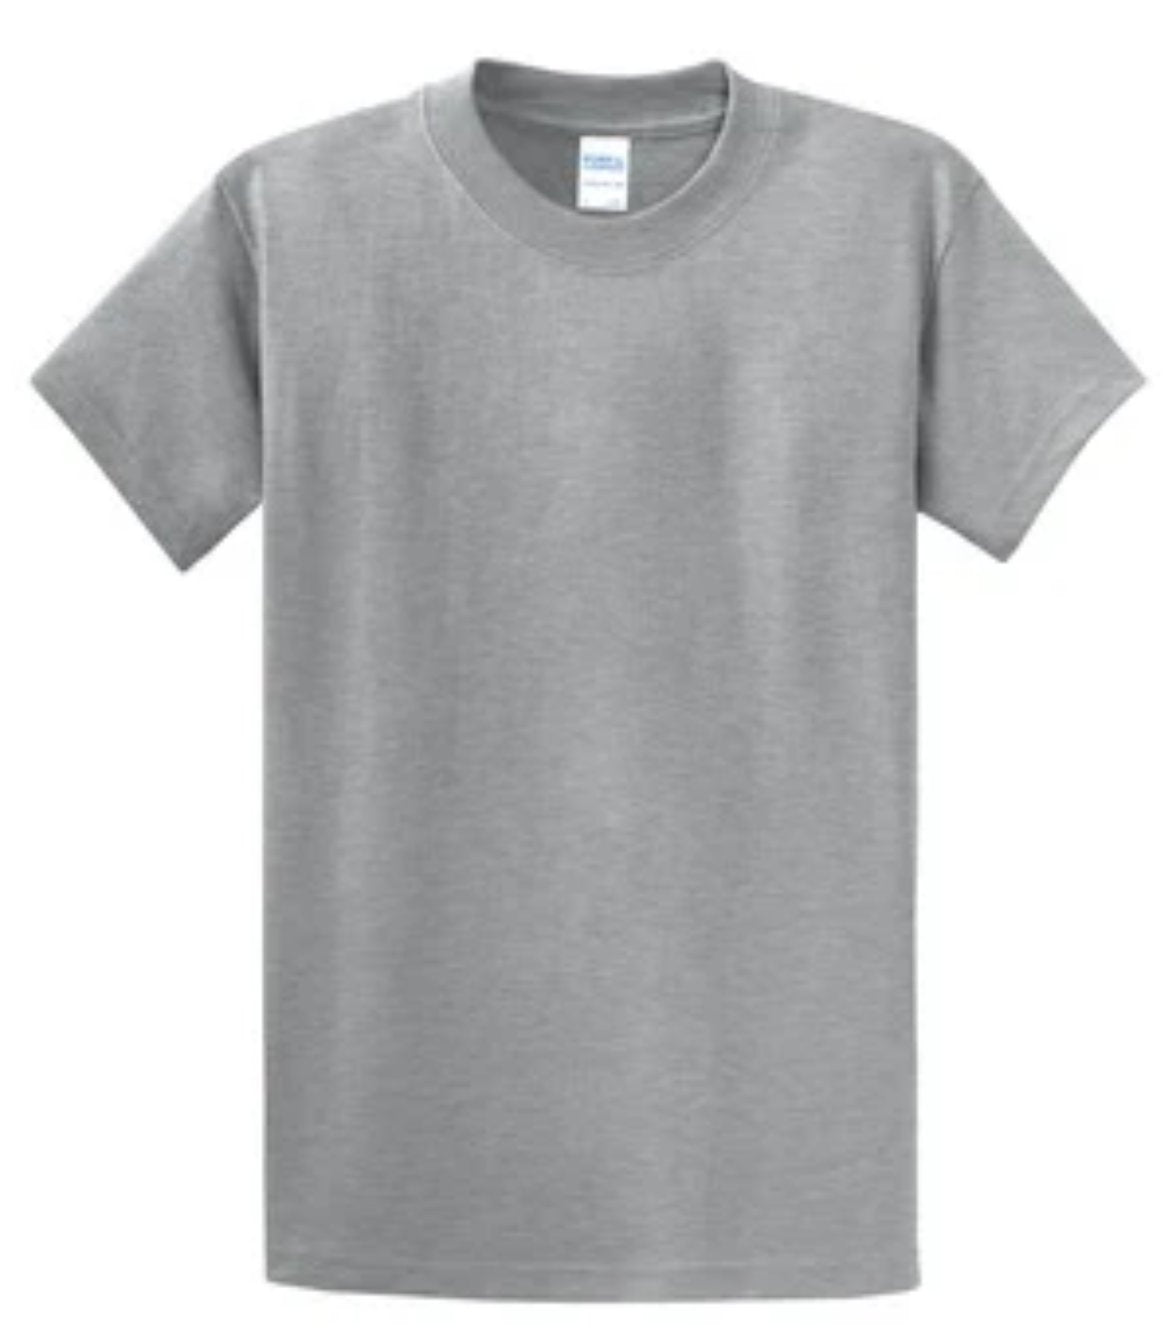 Port & Company 100% Cotton Essential T-Shirt Athletic Gray Tall PC61T